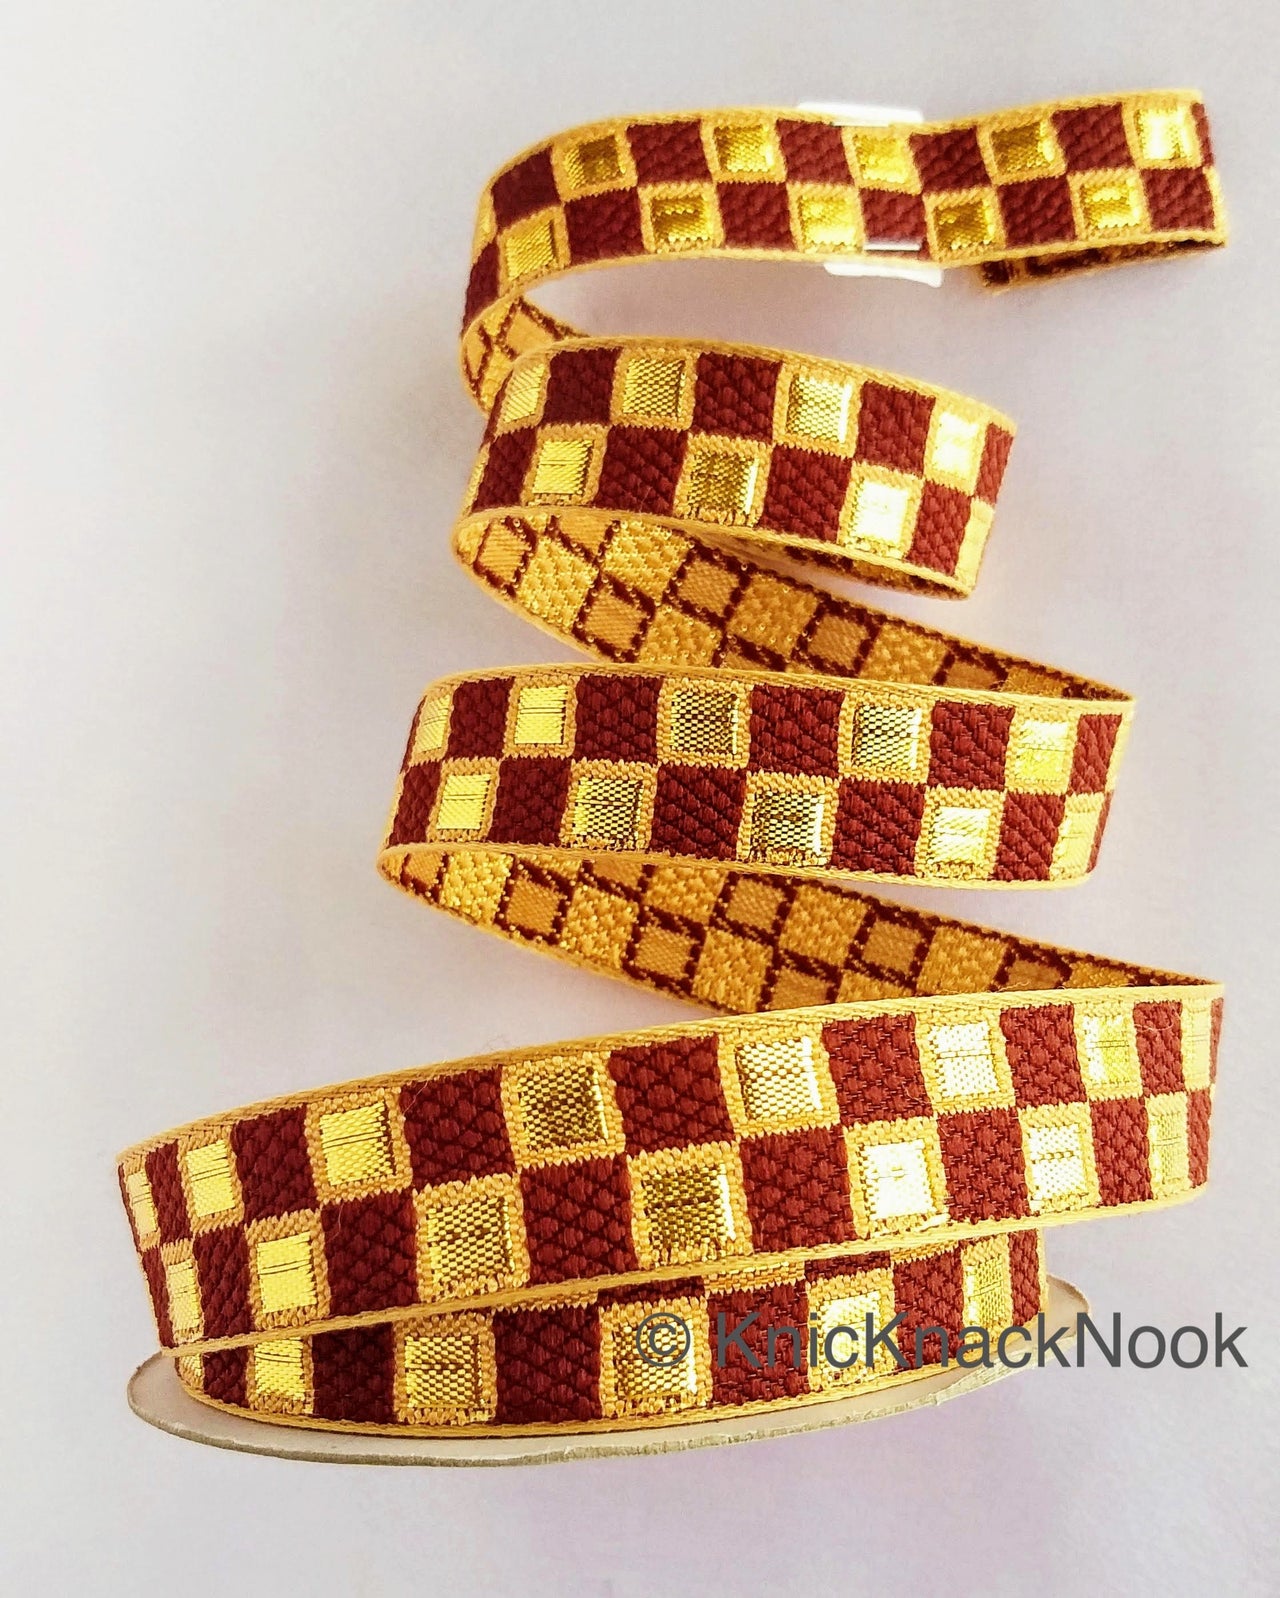 Brown and Gold Jacquard Weaving Trim, Trim By 2 Yards, Craft Decorative Ribbon